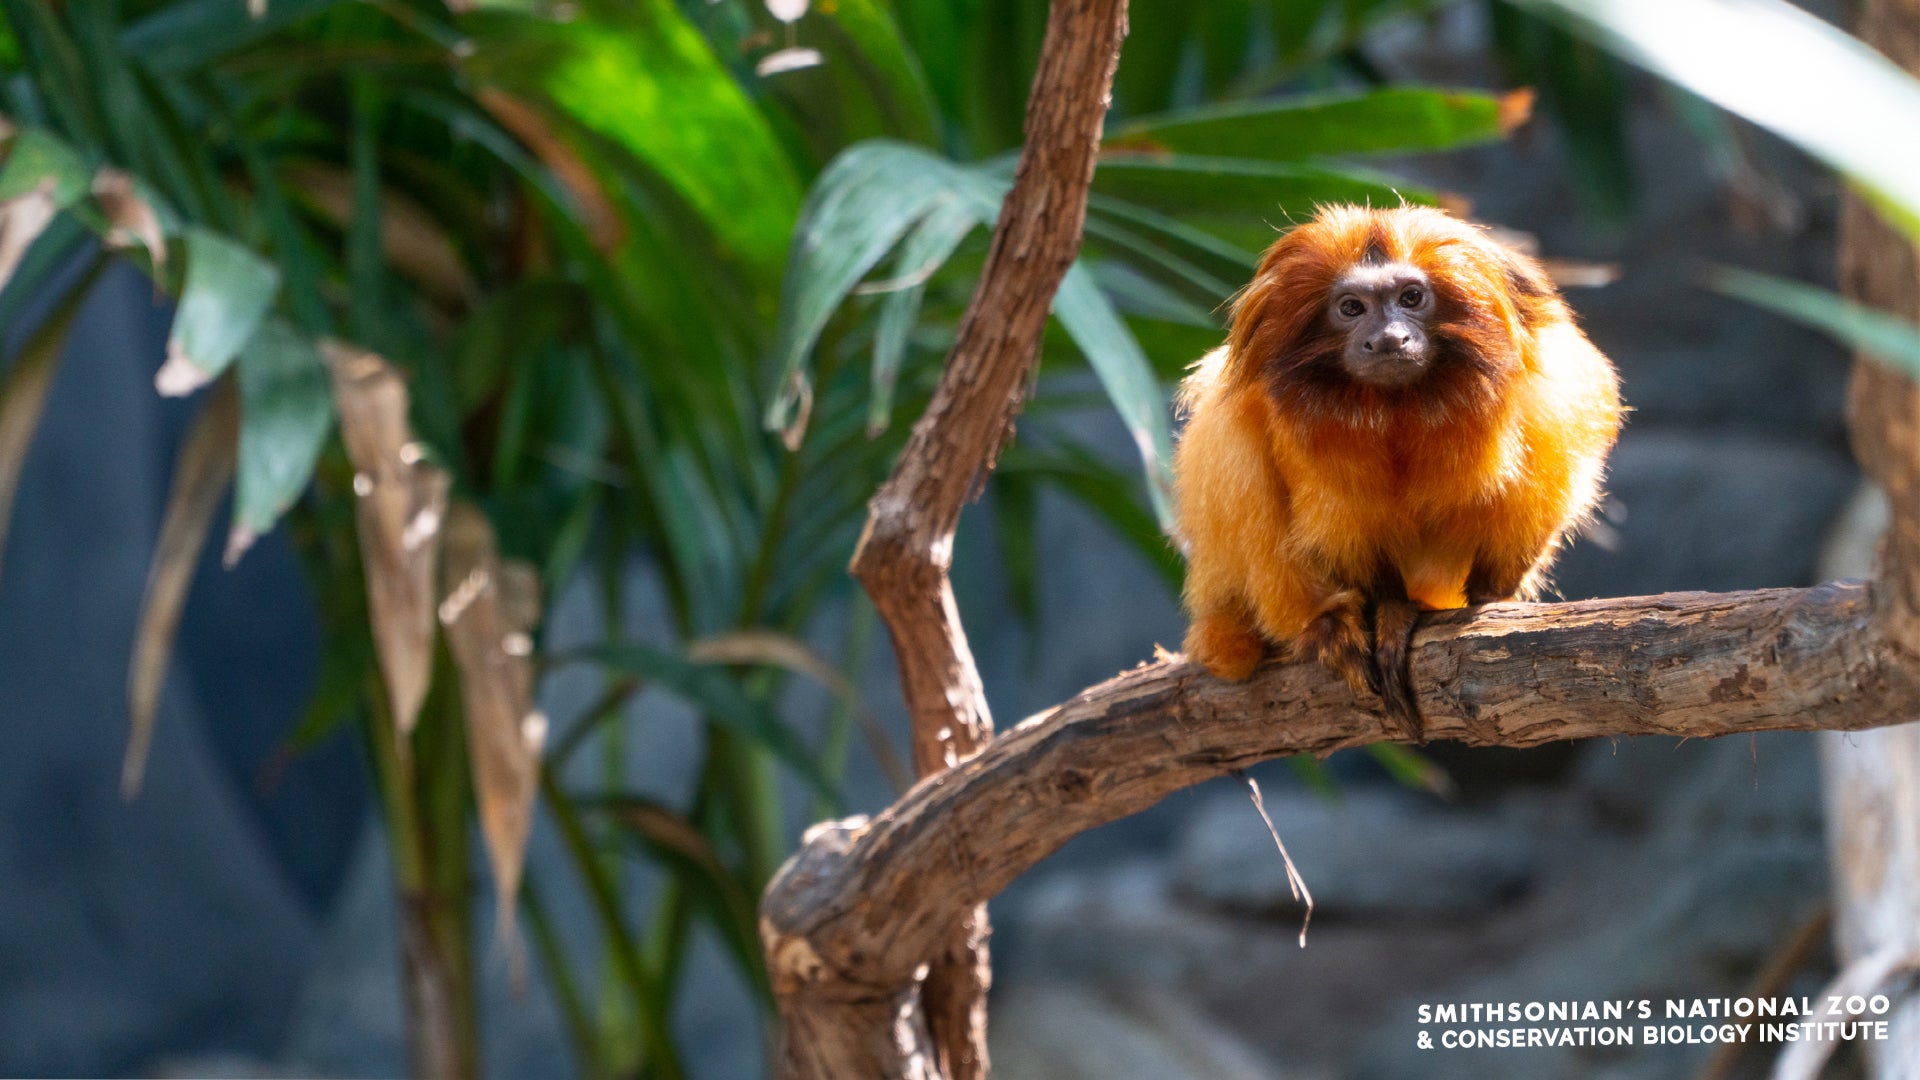 A small monkey, called golden lion tamarin, perched on a tree branch